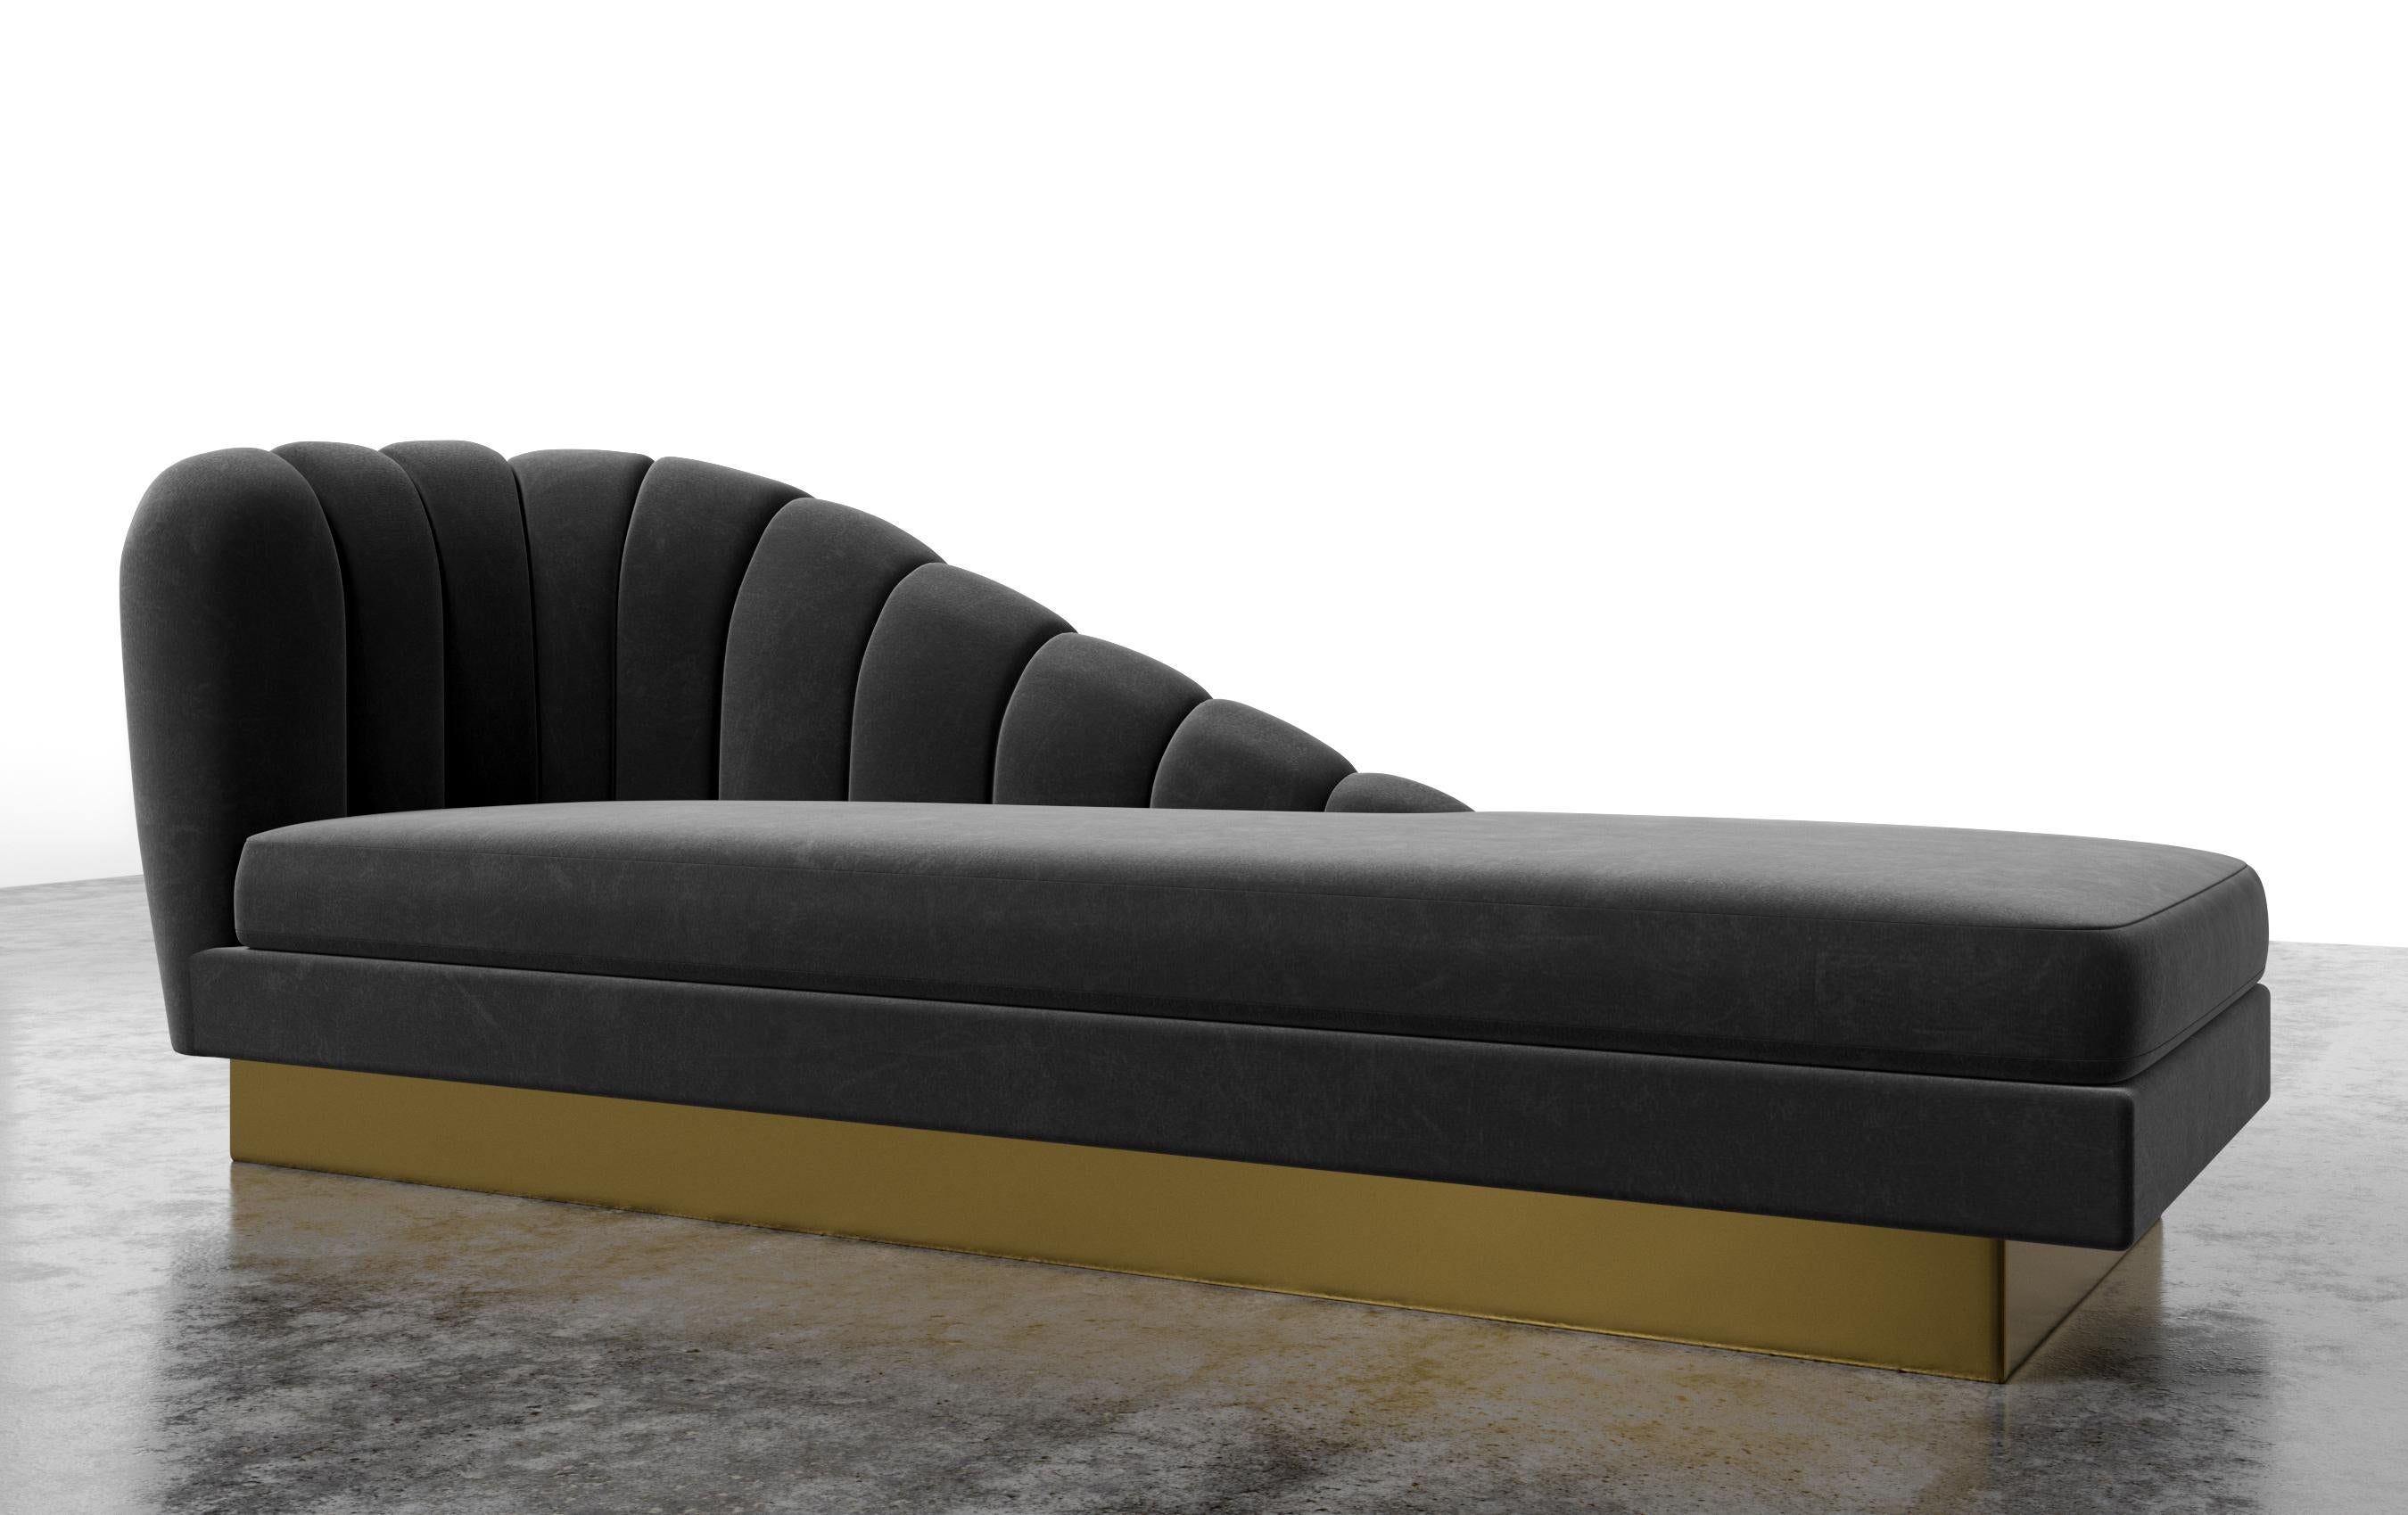 The Guinevere chaise, inspired by the curvature of Gaudi architecture, features an asymmetrical channeled scalloped slope that meets and rests over a layered metal plinth base. The custom size will be 76